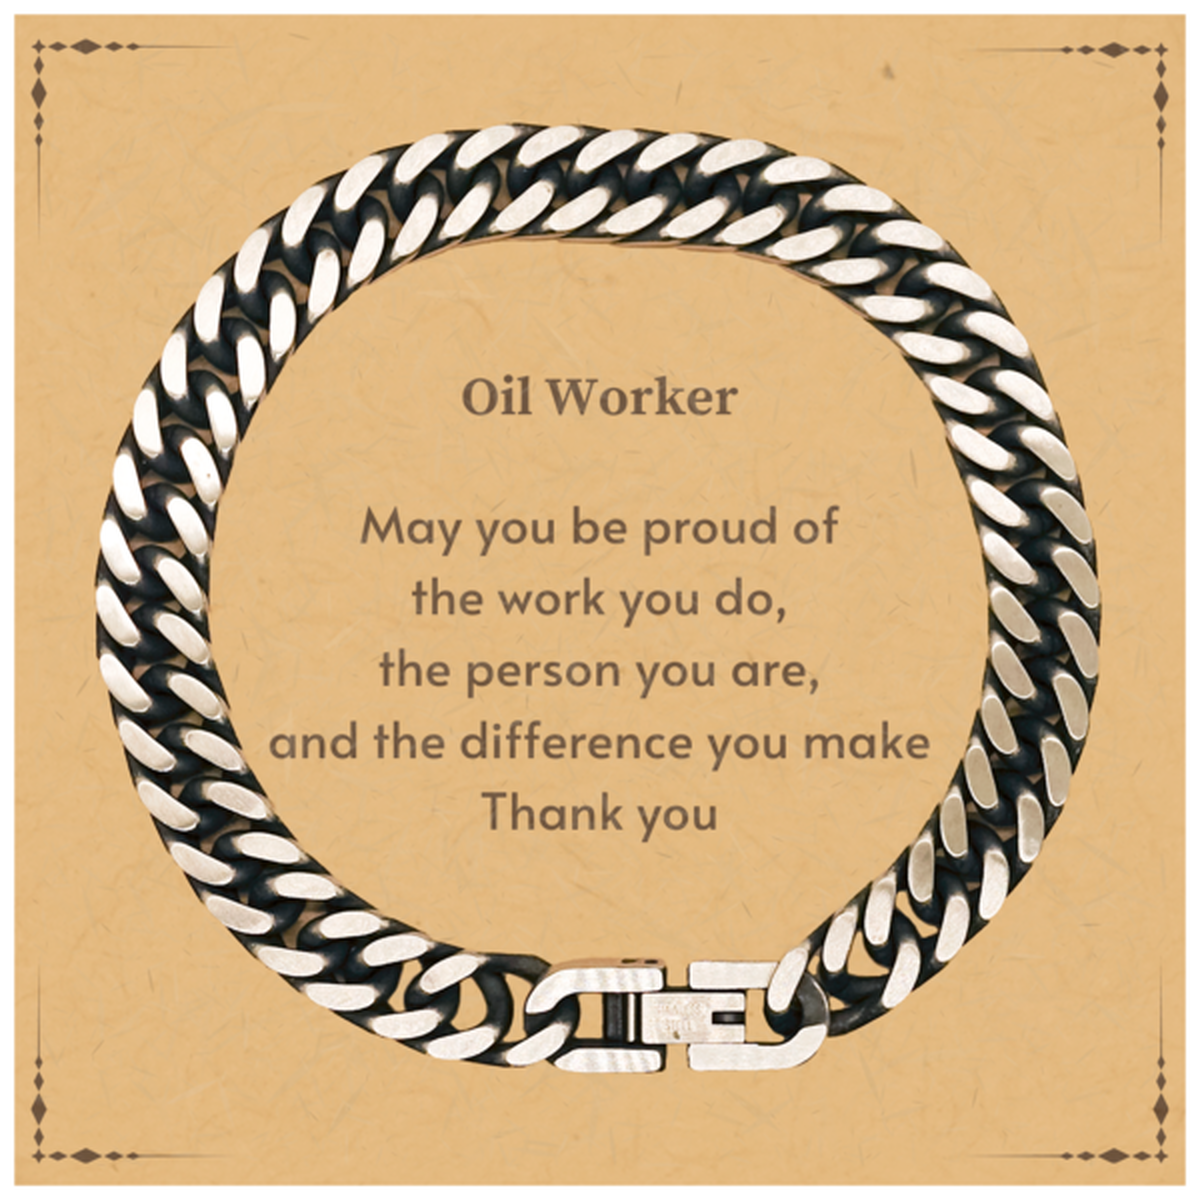 Heartwarming Cuban Link Chain Bracelet Retirement Coworkers Gifts for Oil Worker, Oil Worker May You be proud of the work you do, the person you are Gifts for Boss Men Women Friends